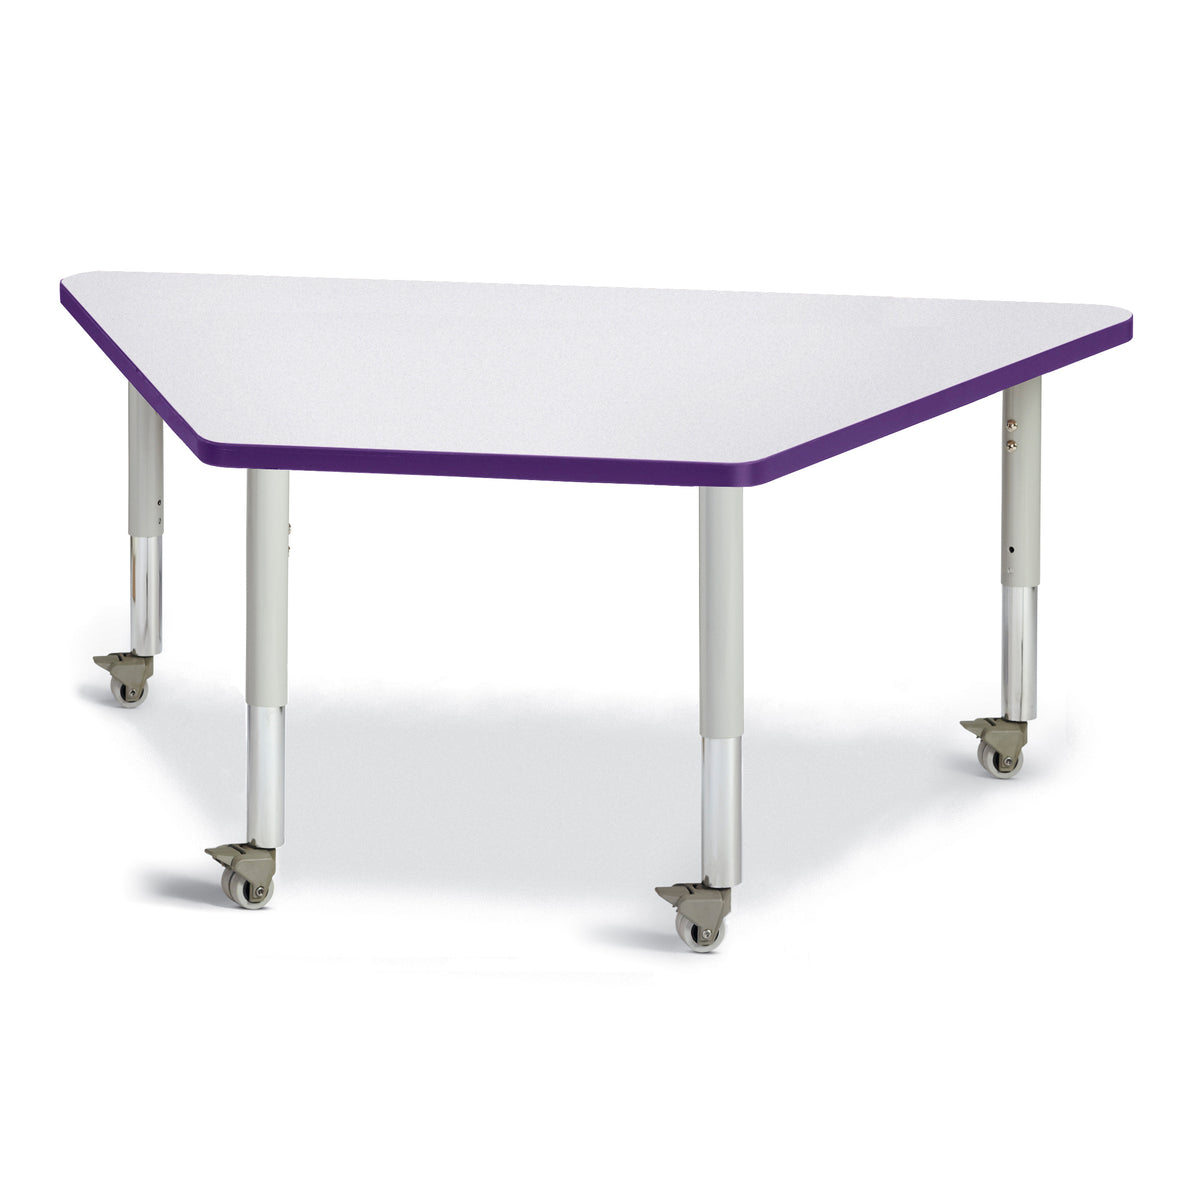 6443JCM004, Berries Trapezoid Activity Tables - 30" X 60", Mobile - Freckled Gray/Purple/Gray